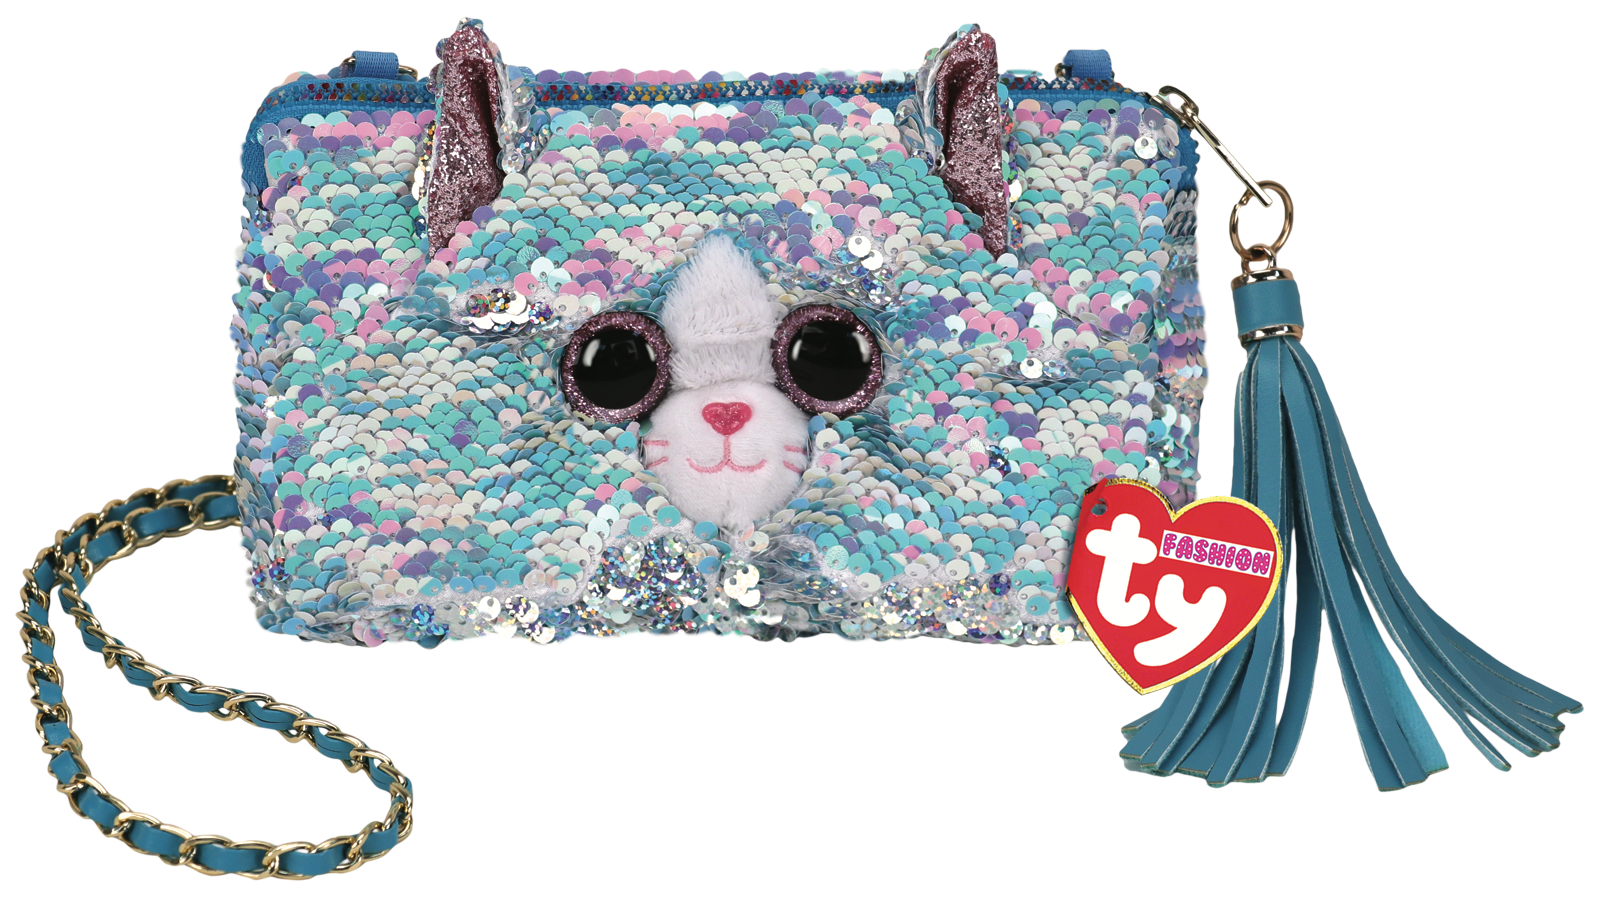 Ty Plush - Sequin Square Purse - Whimsy the Cat (TY95151)